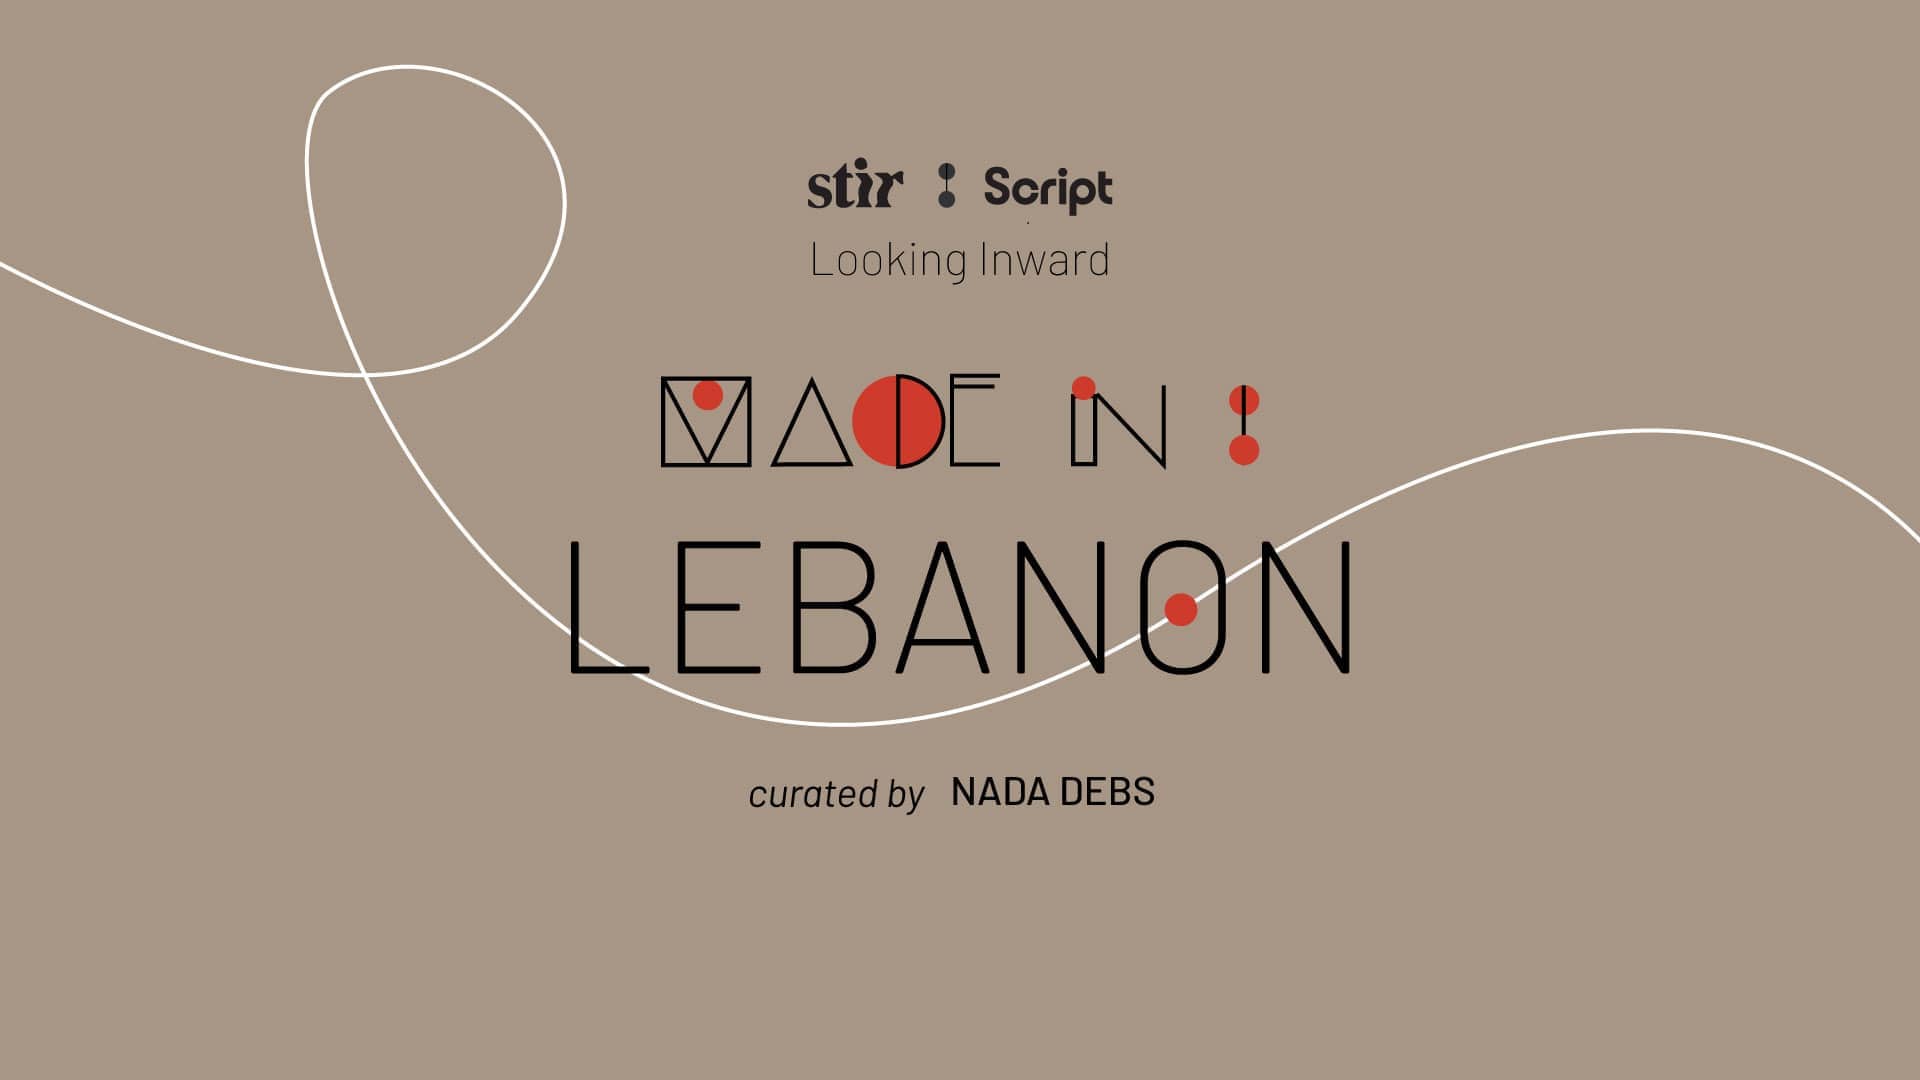 Made in Lebanon: Curated by Nada Debs